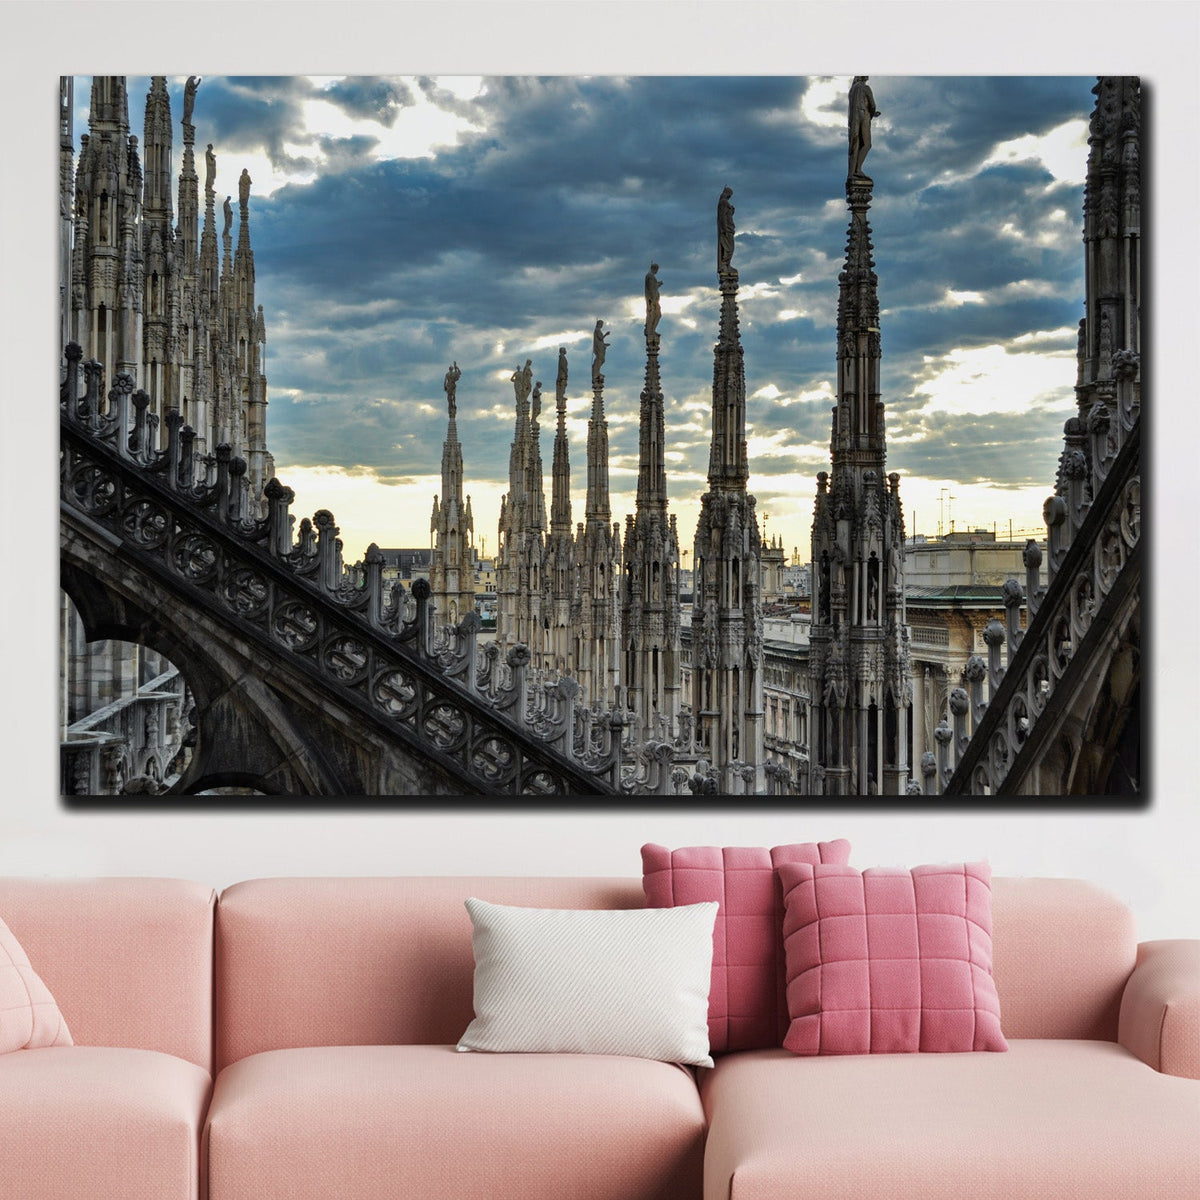 https://cdn.shopify.com/s/files/1/0387/9986/8044/products/RoofTerracesofCathedralDuomoCanvasArtprintStretched-1.jpg